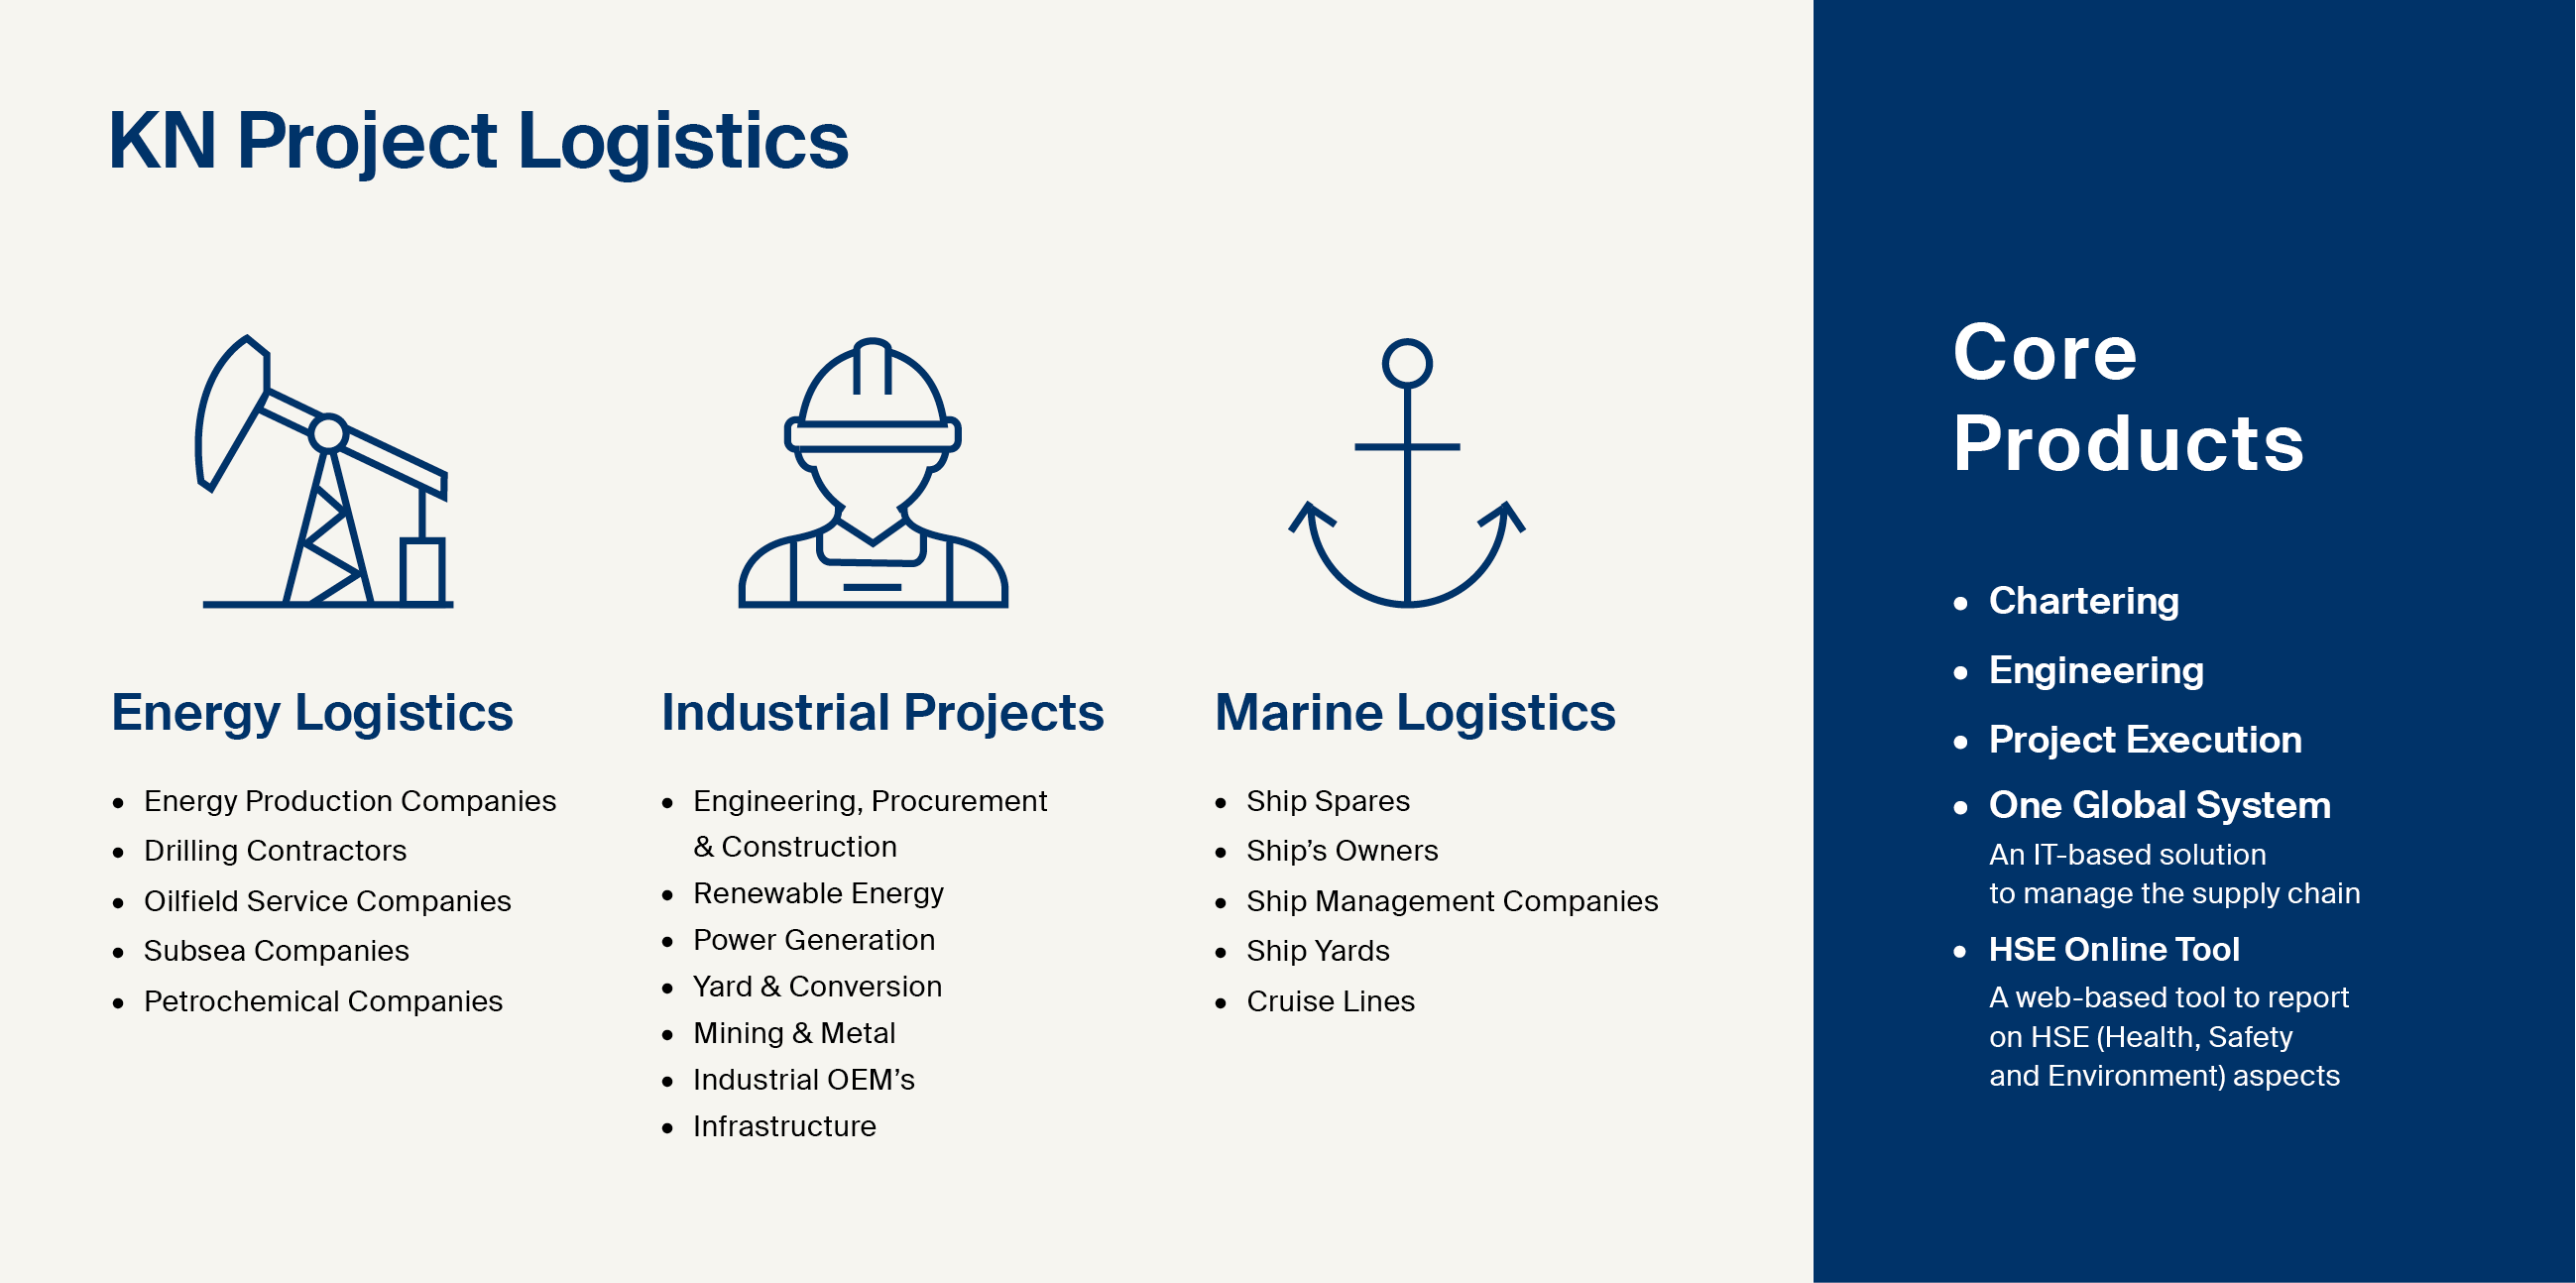 Contact our experts today to learn more about our project logistics solutions